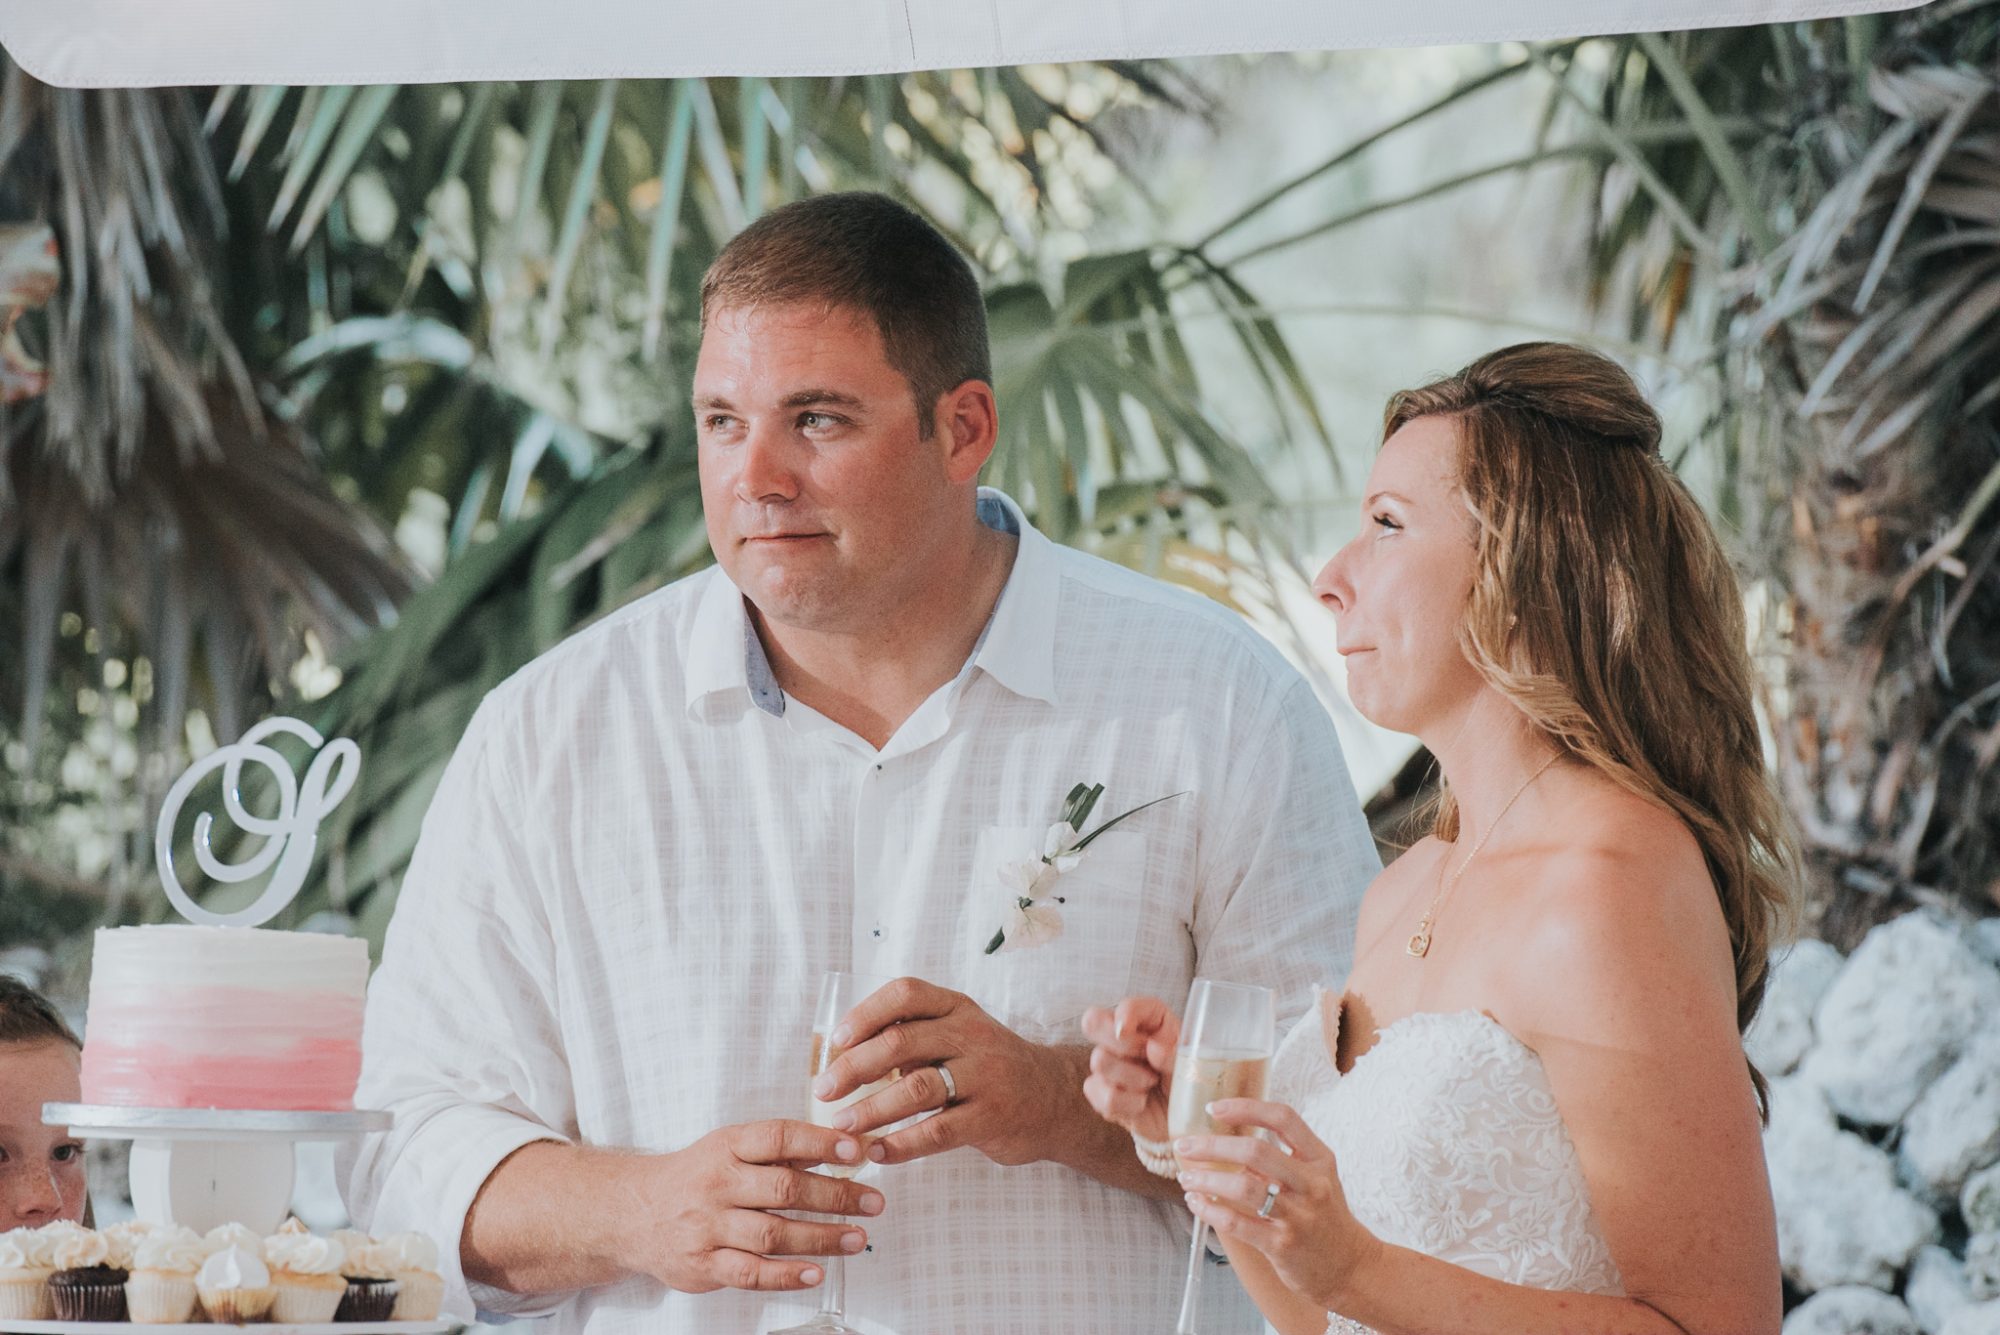 A bride and groom toasting at their destination wedding in the Florida Keys.